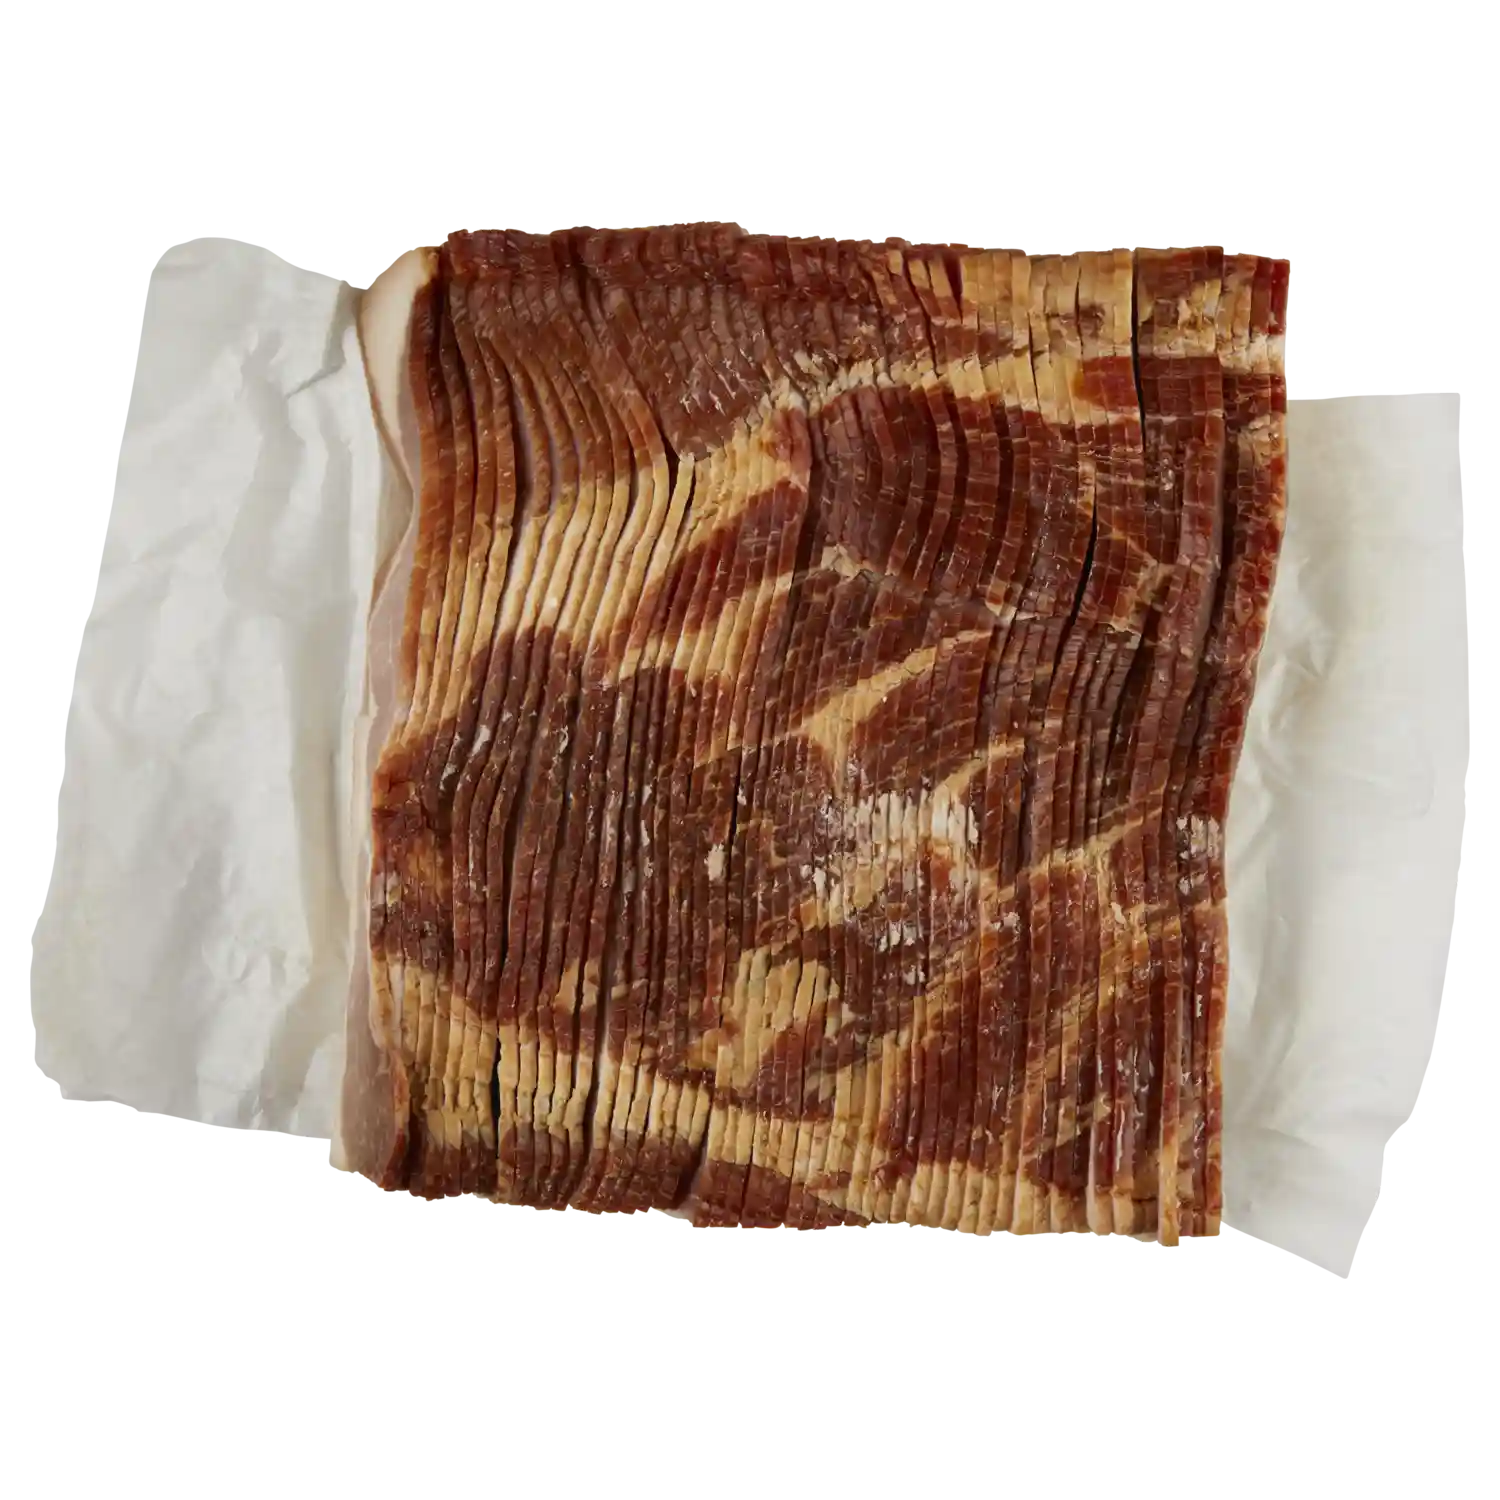 Wright® Brand Naturally Hickory Smoked Thin Sliced Bacon, Bulk, 10 Lbs, 18-22 Slices Per Pound, Frozen_image_31